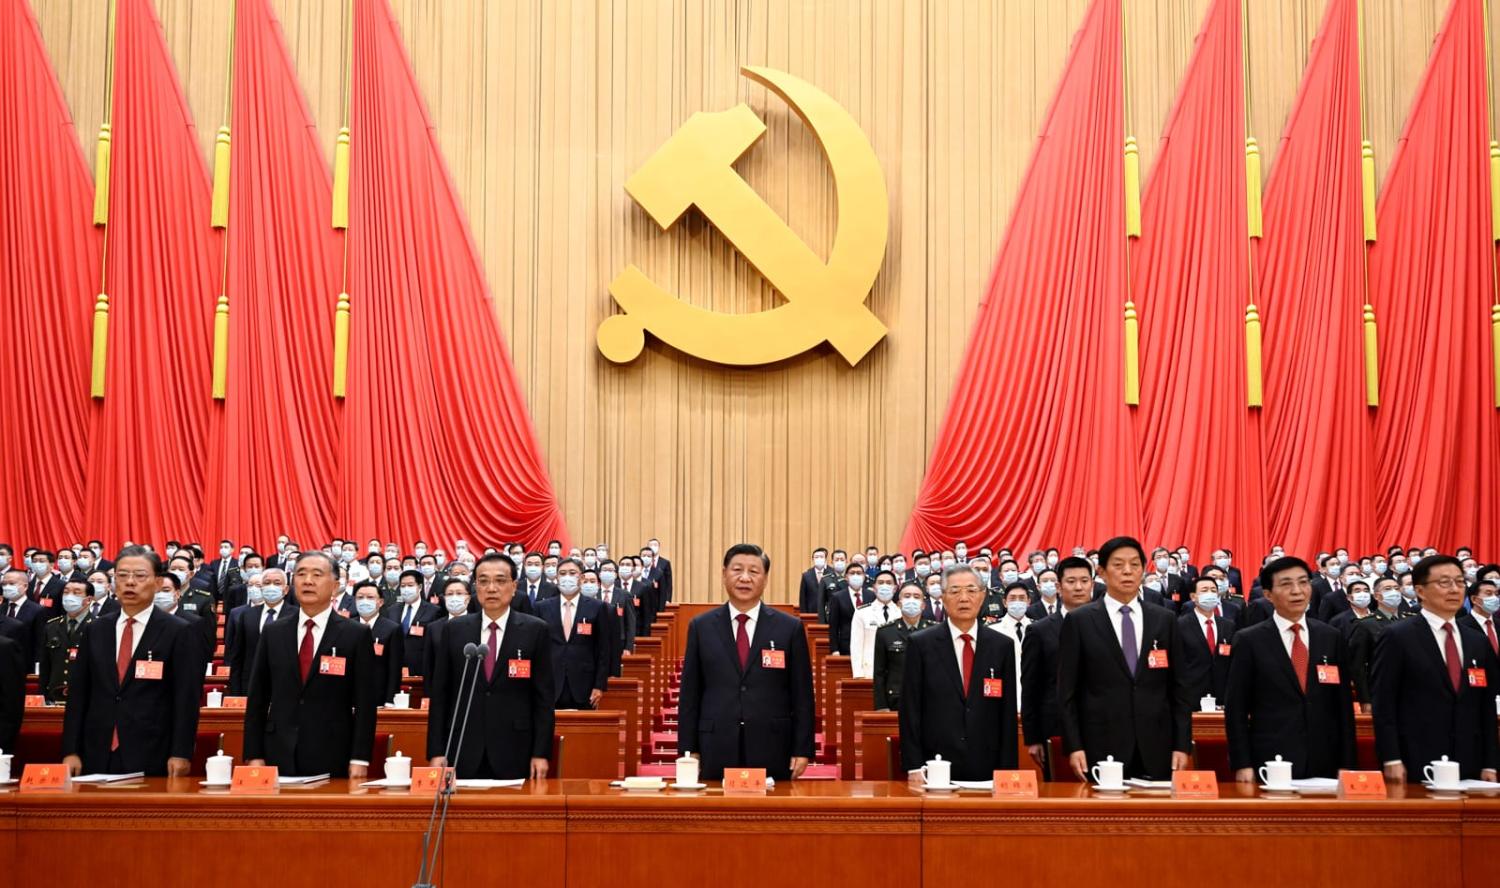 The Party may be presented as the beacon for the Chinese nation and its people, but Xi warned it members can be a source of the Party’s weakness (Li Xueren/Xinhua via Getty Images)